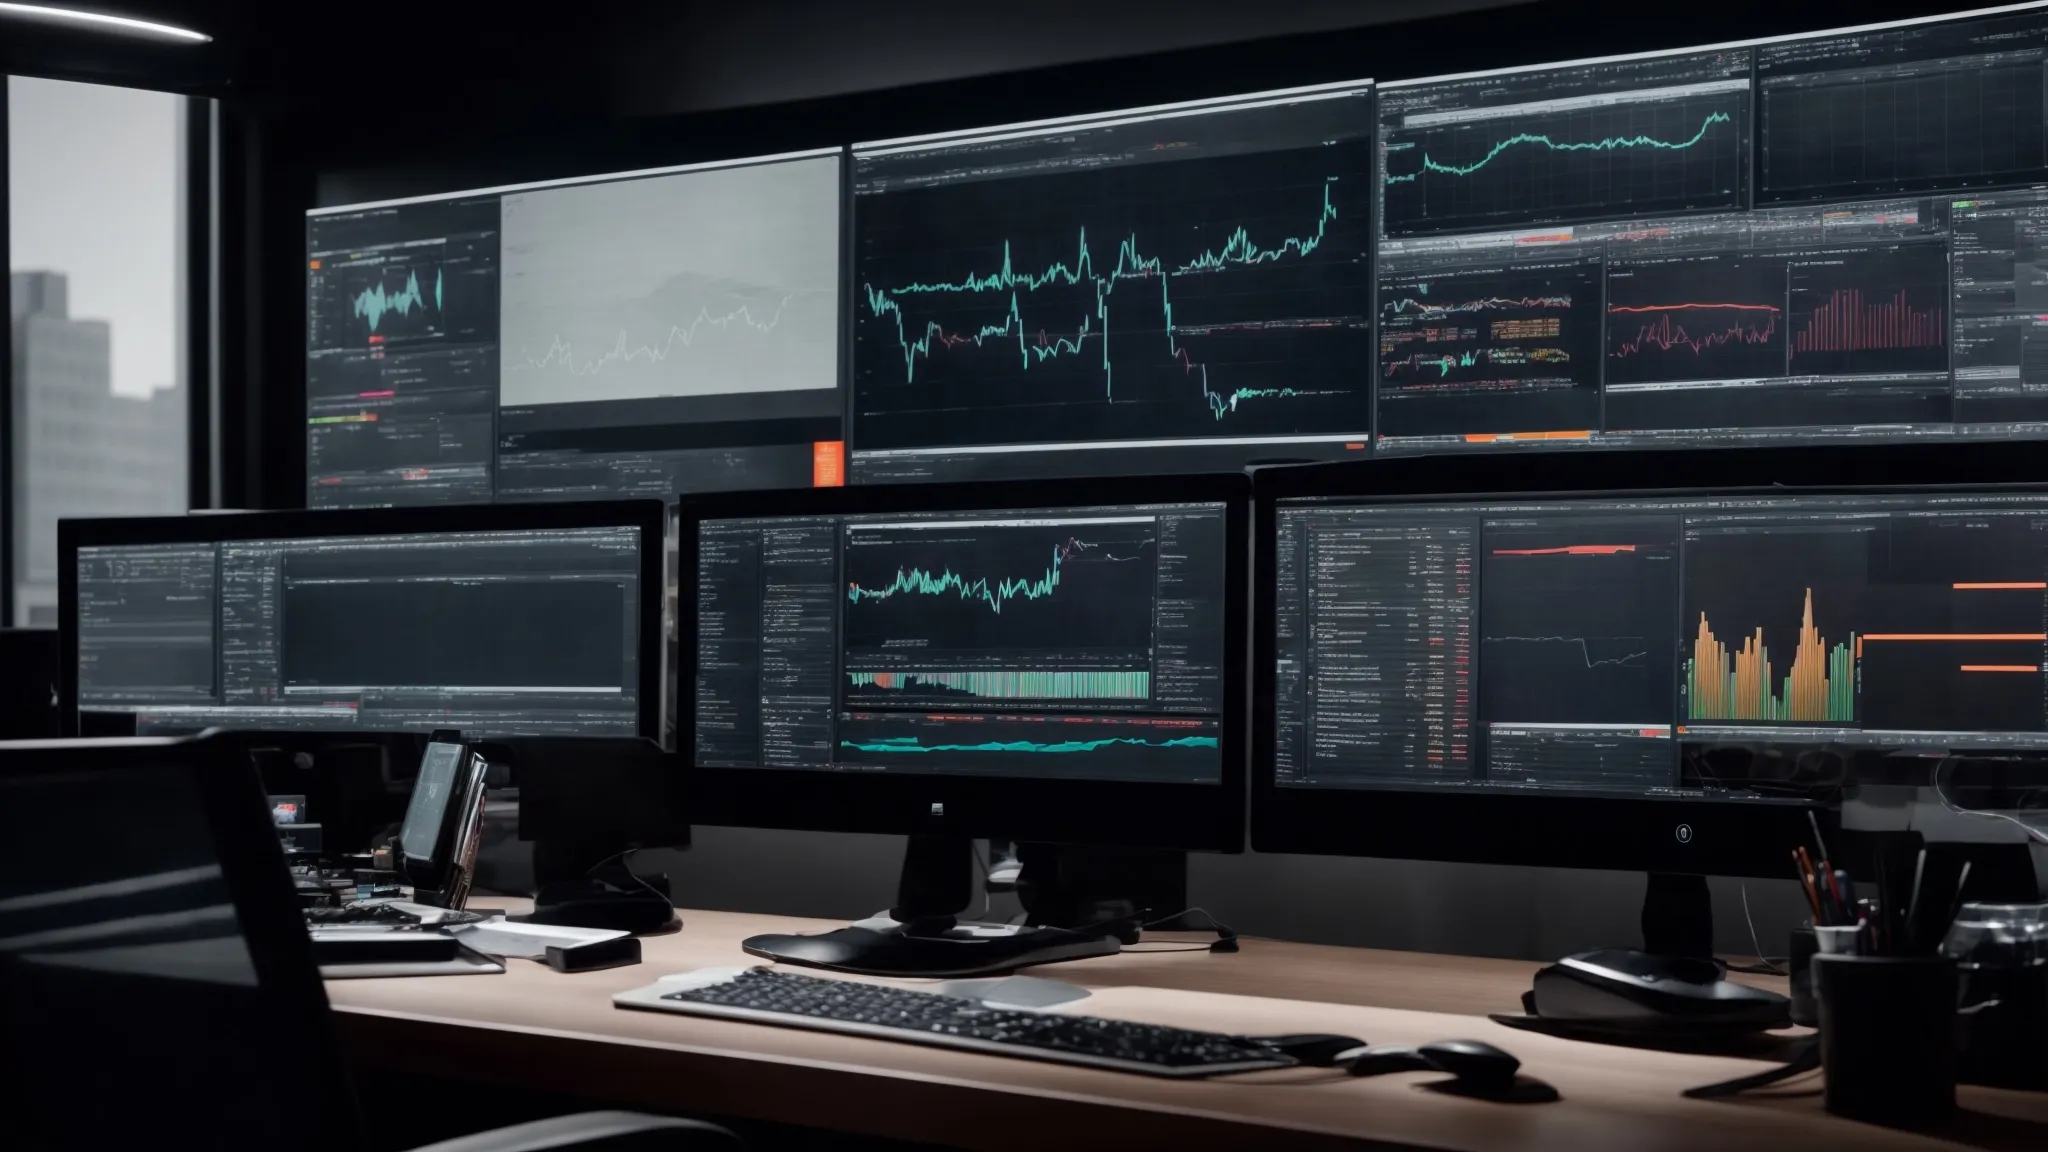 a sleek, modern workspace with multiple computer monitors displaying graphs and analytics tools, illustrating a digital content management system in action.